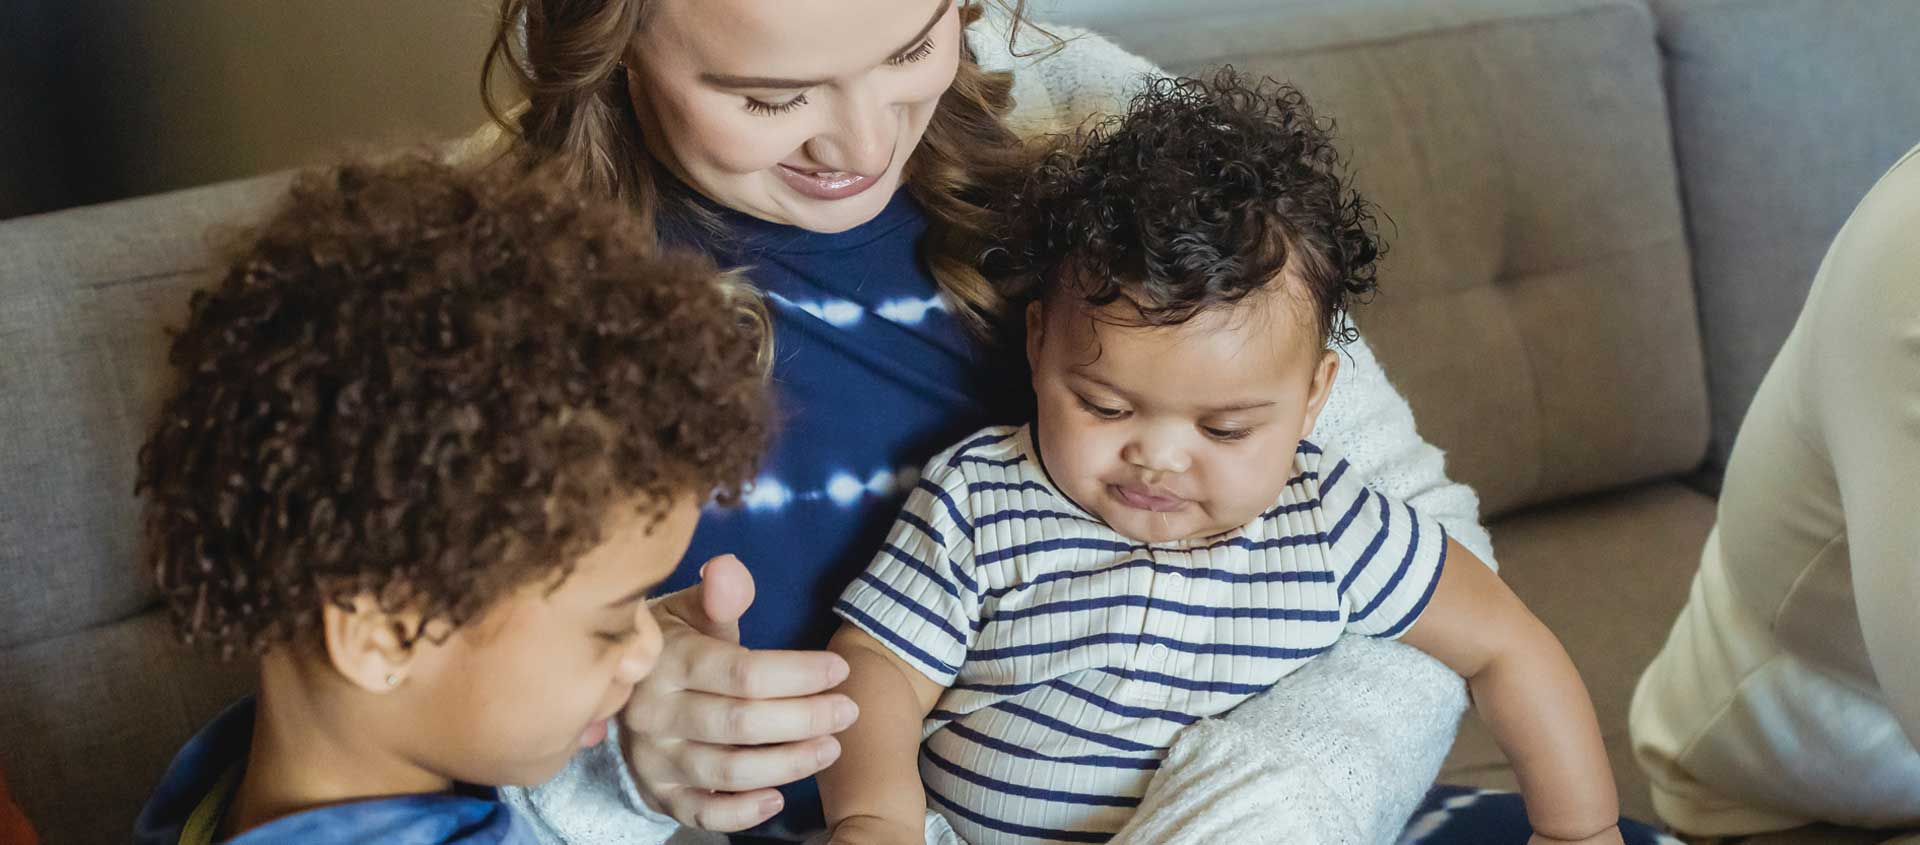 A Caucasian mother holds and Black infant while her Black daughter shows some play food to the infant.